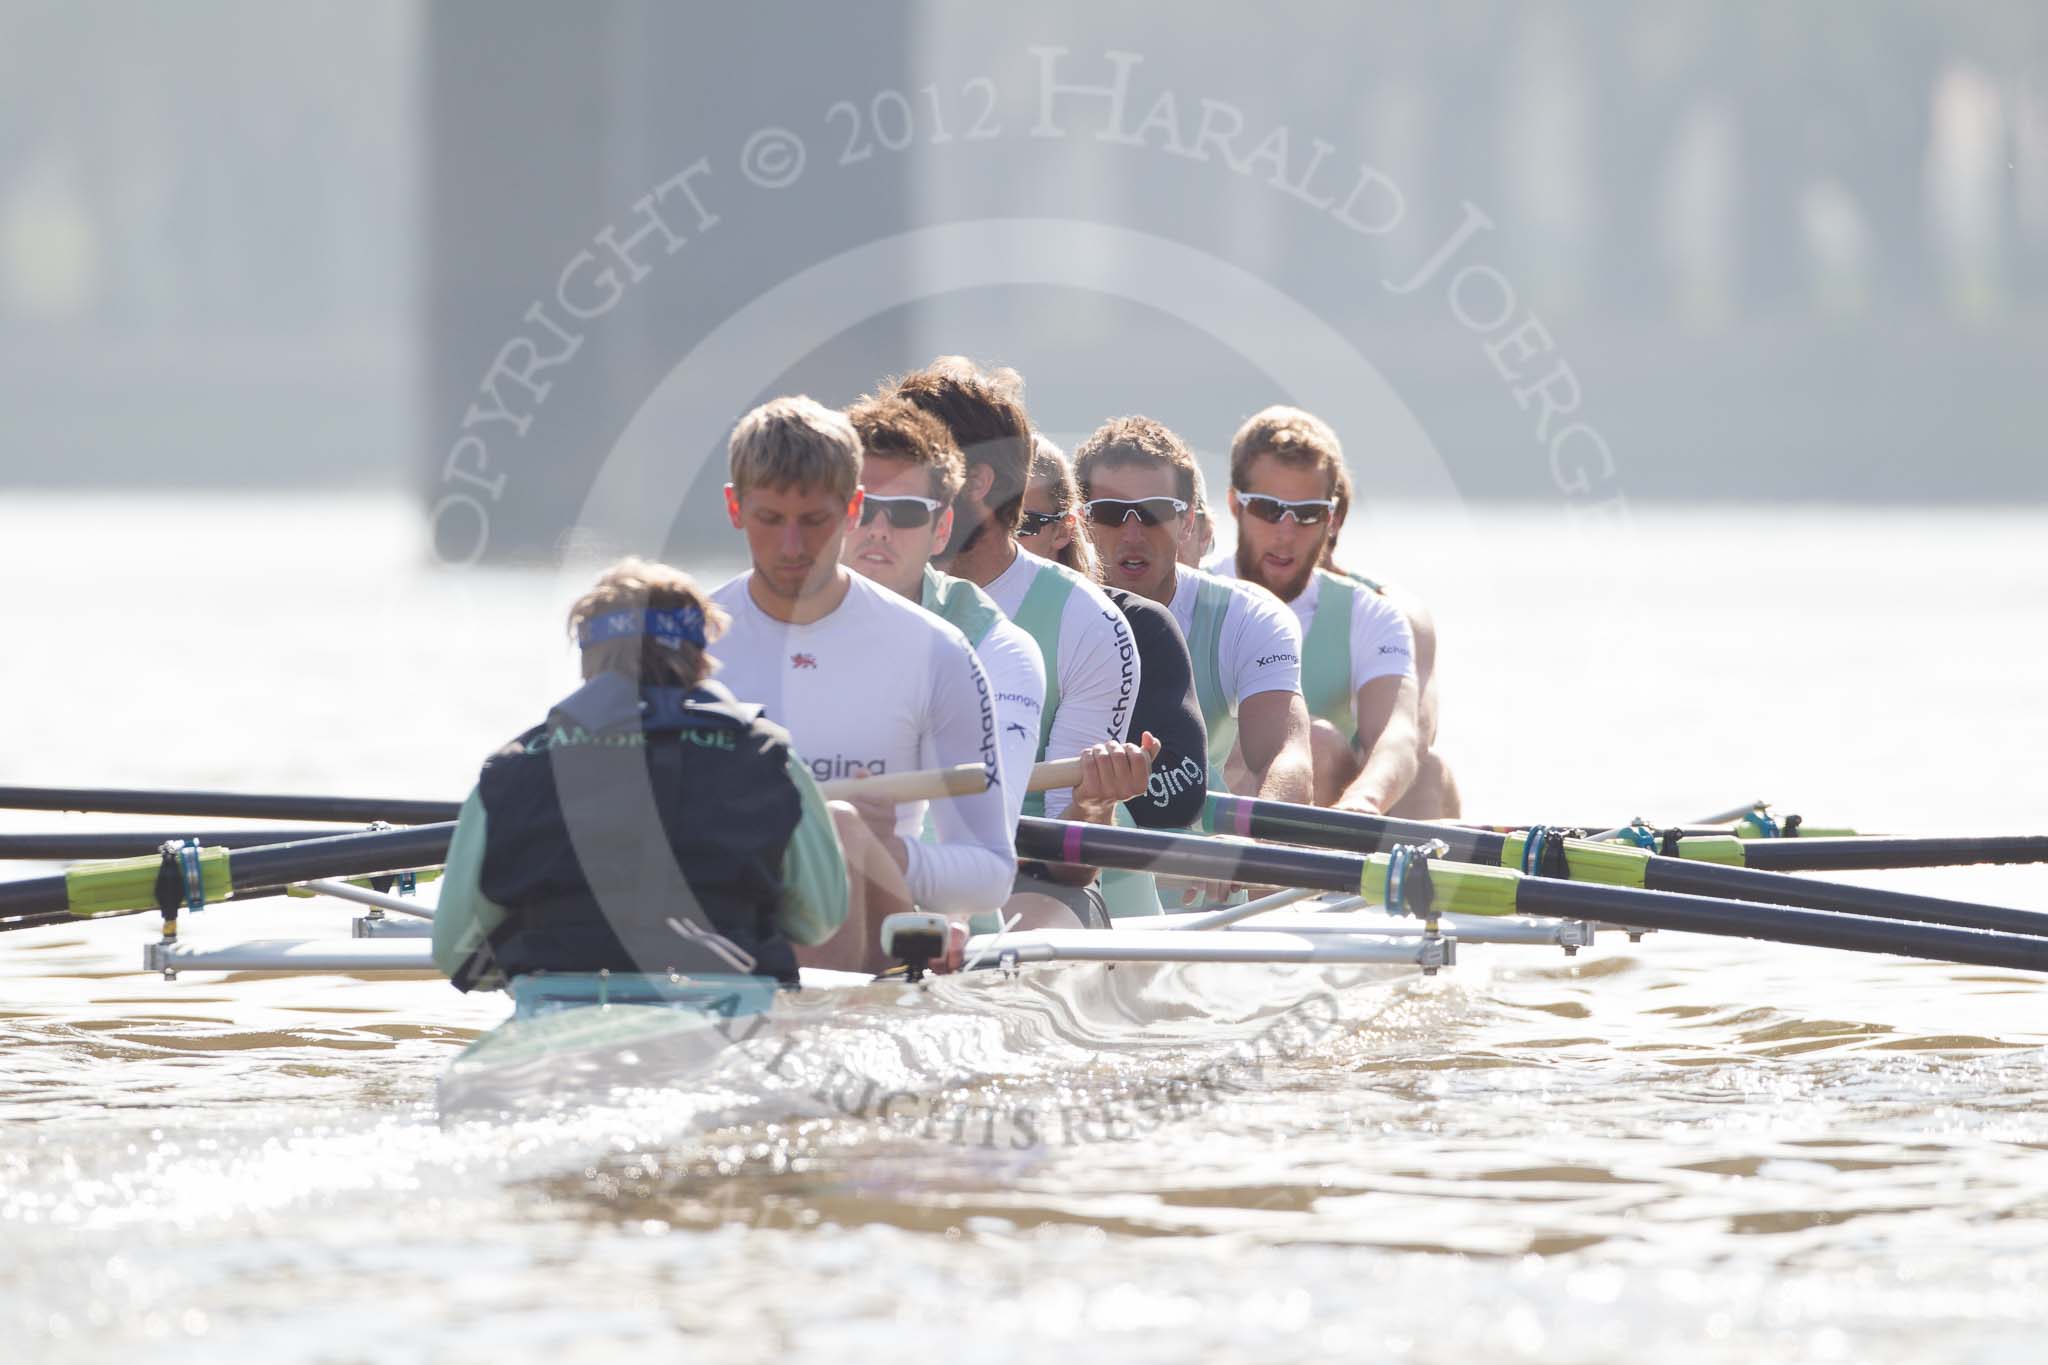 The Boat Race season 2012 - Tideway Week (Tuesday).




on 03 April 2012 at 10:32, image #42